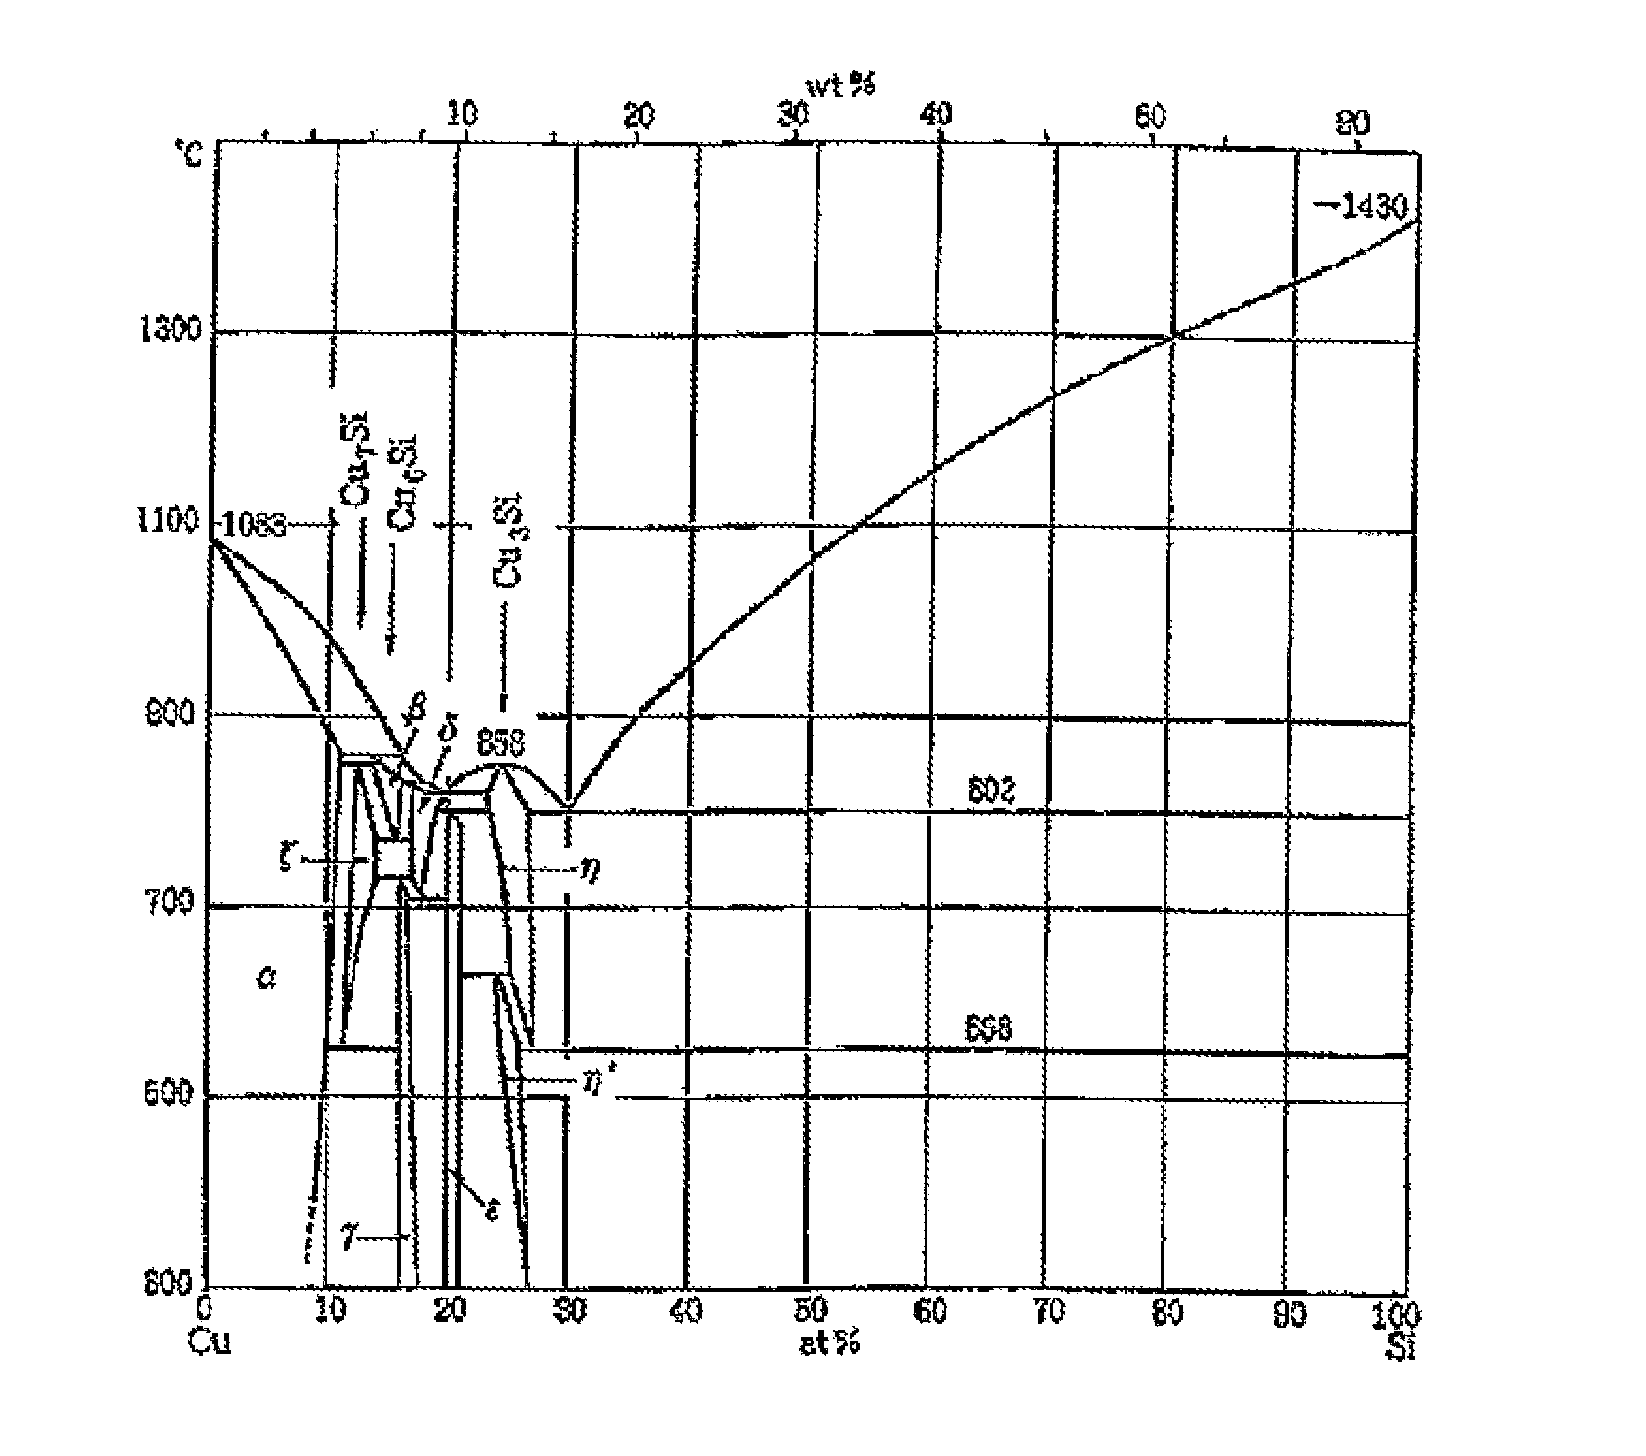 Si-based-alloy anode material